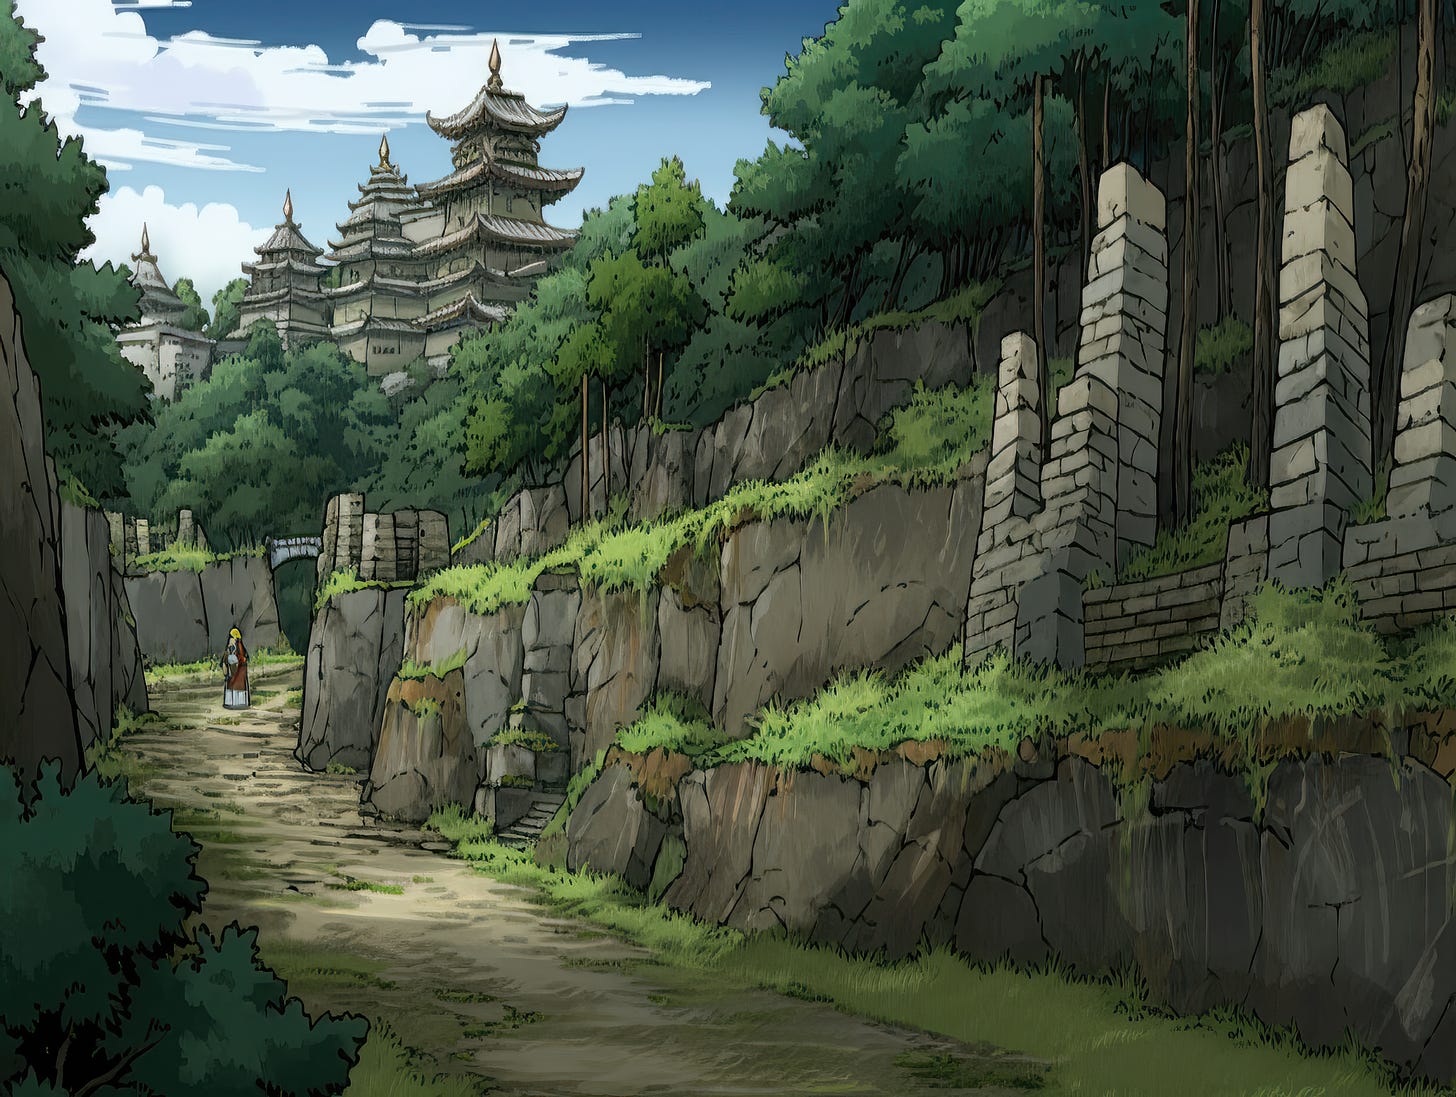 A narrow pathway surrounded by foreboding wilderness, leading to the sanctuary of a city in the distance